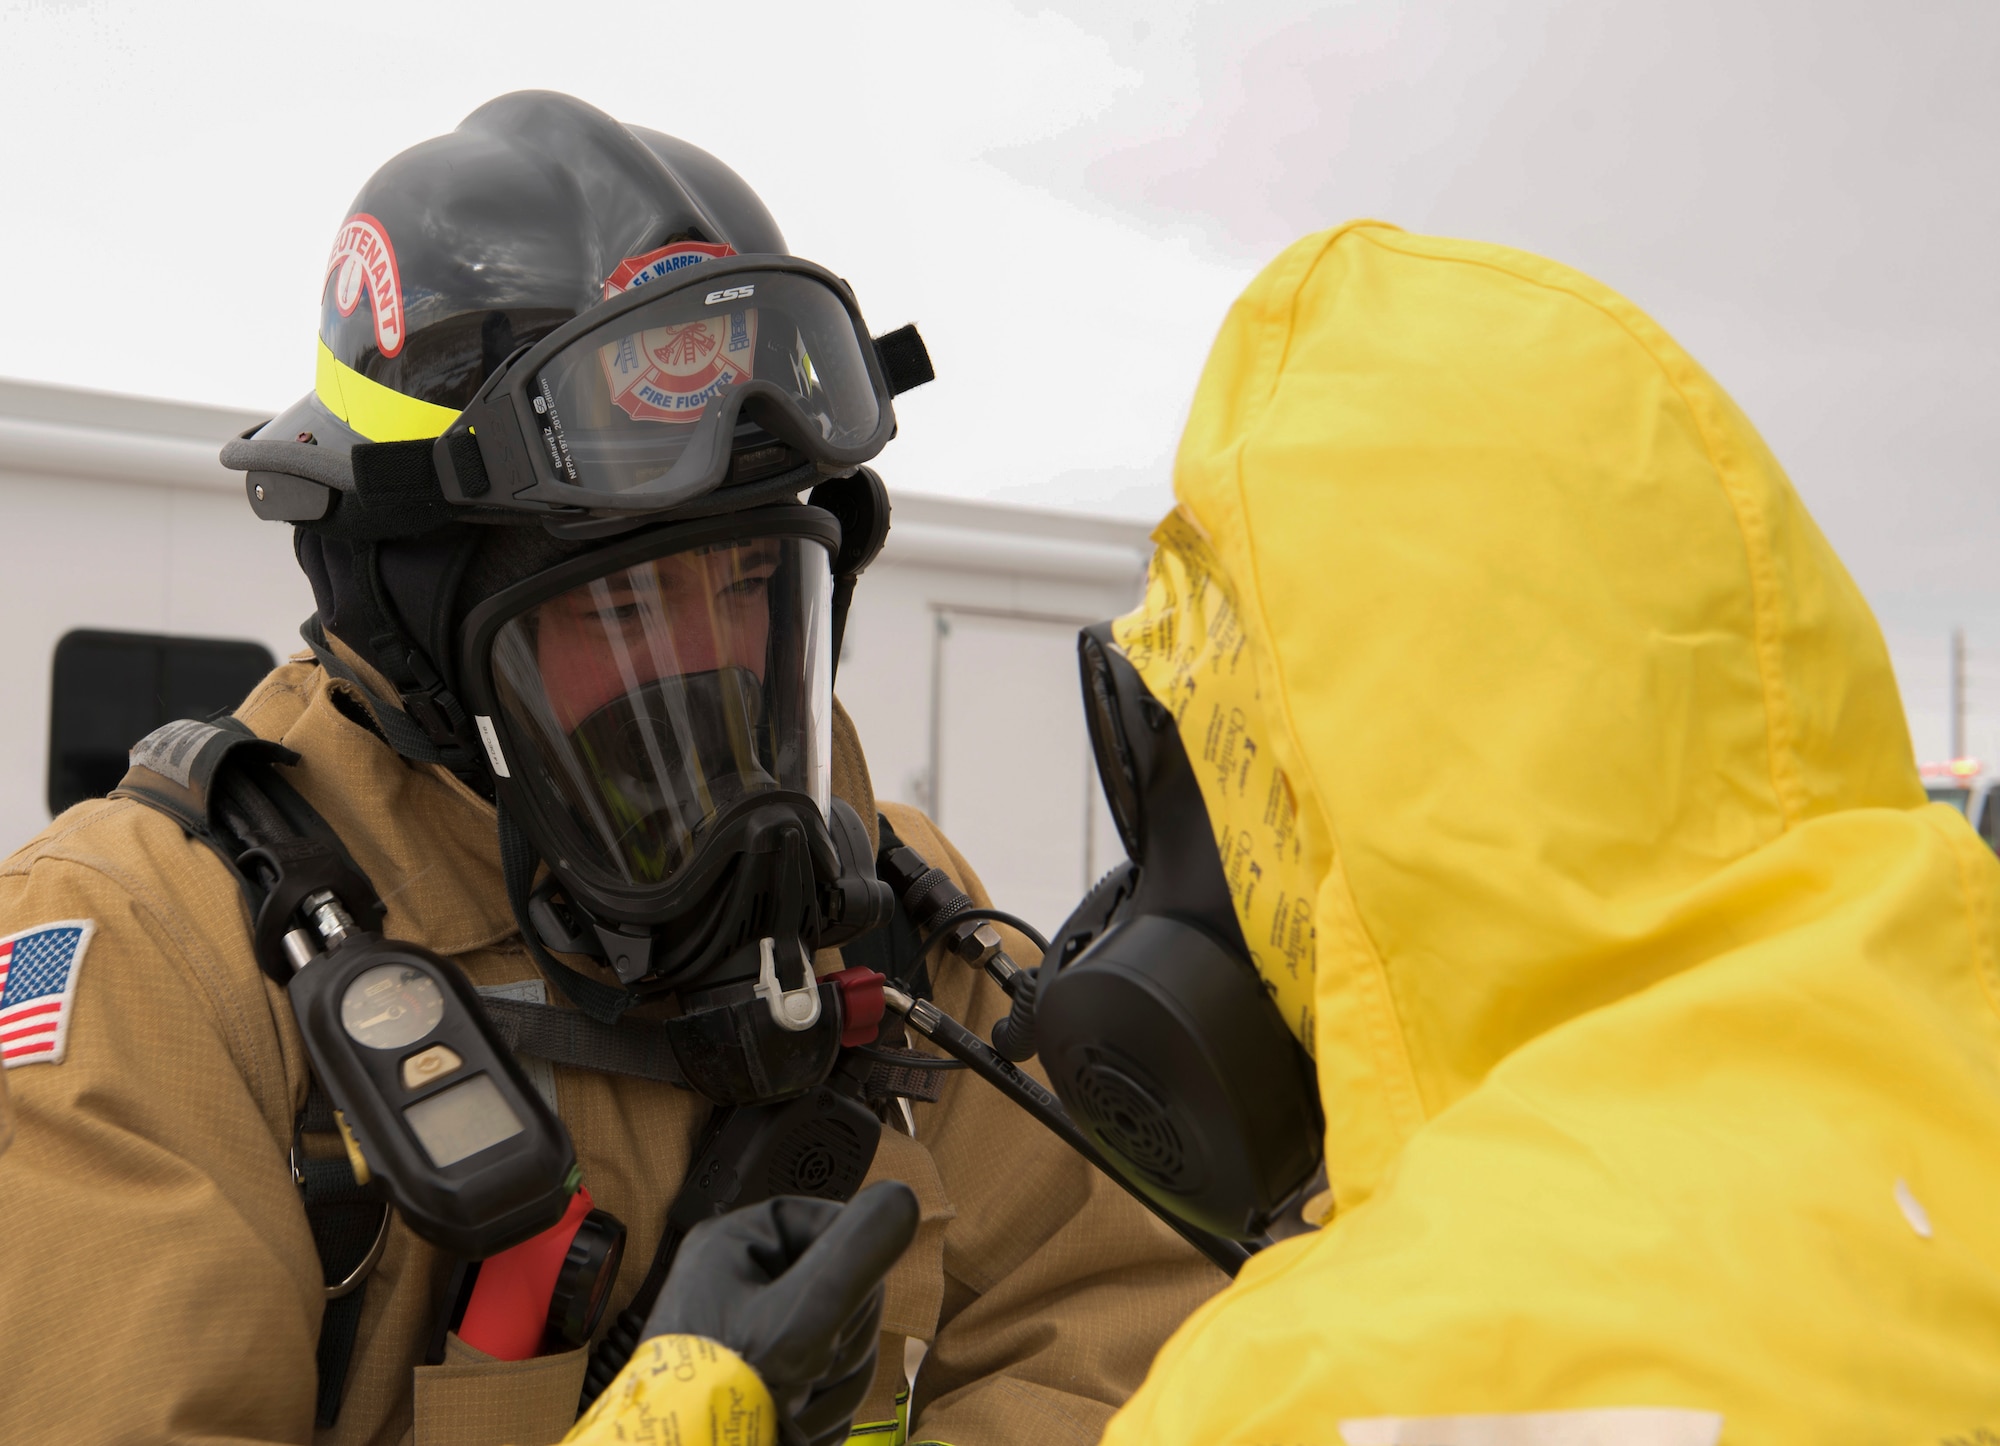 Staff Sgt. Brandin McGovern, 90th Civil Engineering Squadron fire protection member, receives instructions from, an emergency management technician about the process of checking for radiological contamination during an exercise on F.E. Warren Air Force Base, Wyo., Dec. 14, 2017. Emergency management technicians check and remove the outer layer of protection gear to ensure there are no contaminates. (U.S. Air Force photo by Airman 1st Class Braydon Williams)